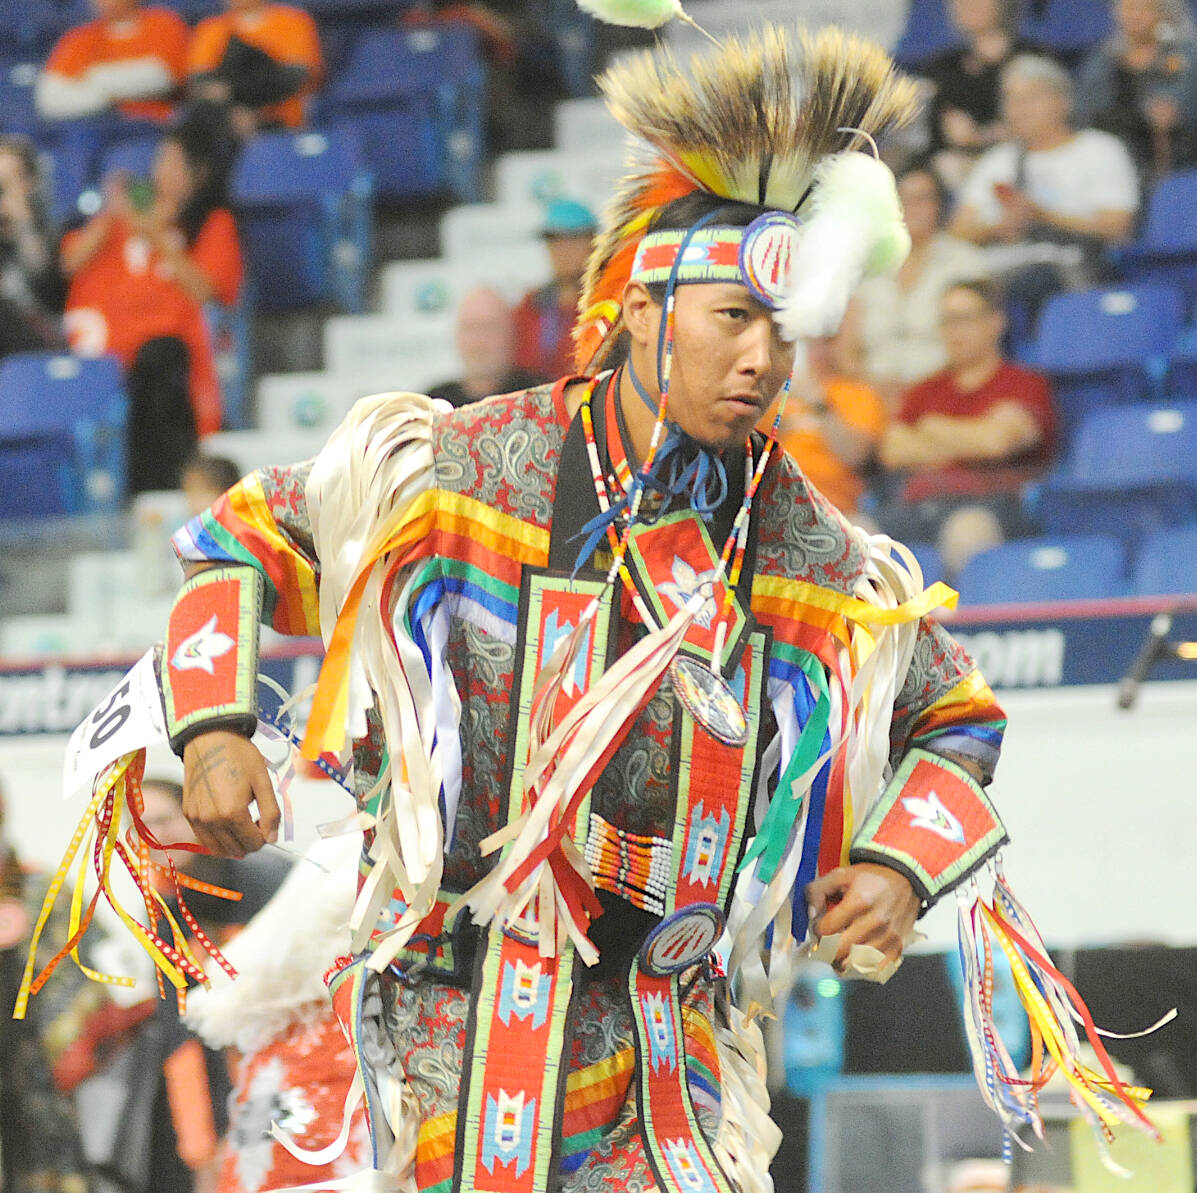 For three days, from Sept. 16 to 18, singers, dancers, and drummers from B.C., Alberta, and the U.S. filled the Langley Events Centre for the first stɑl̓əw̓ powwow cultural event. (Dan Ferguson/Langley Advance Times)